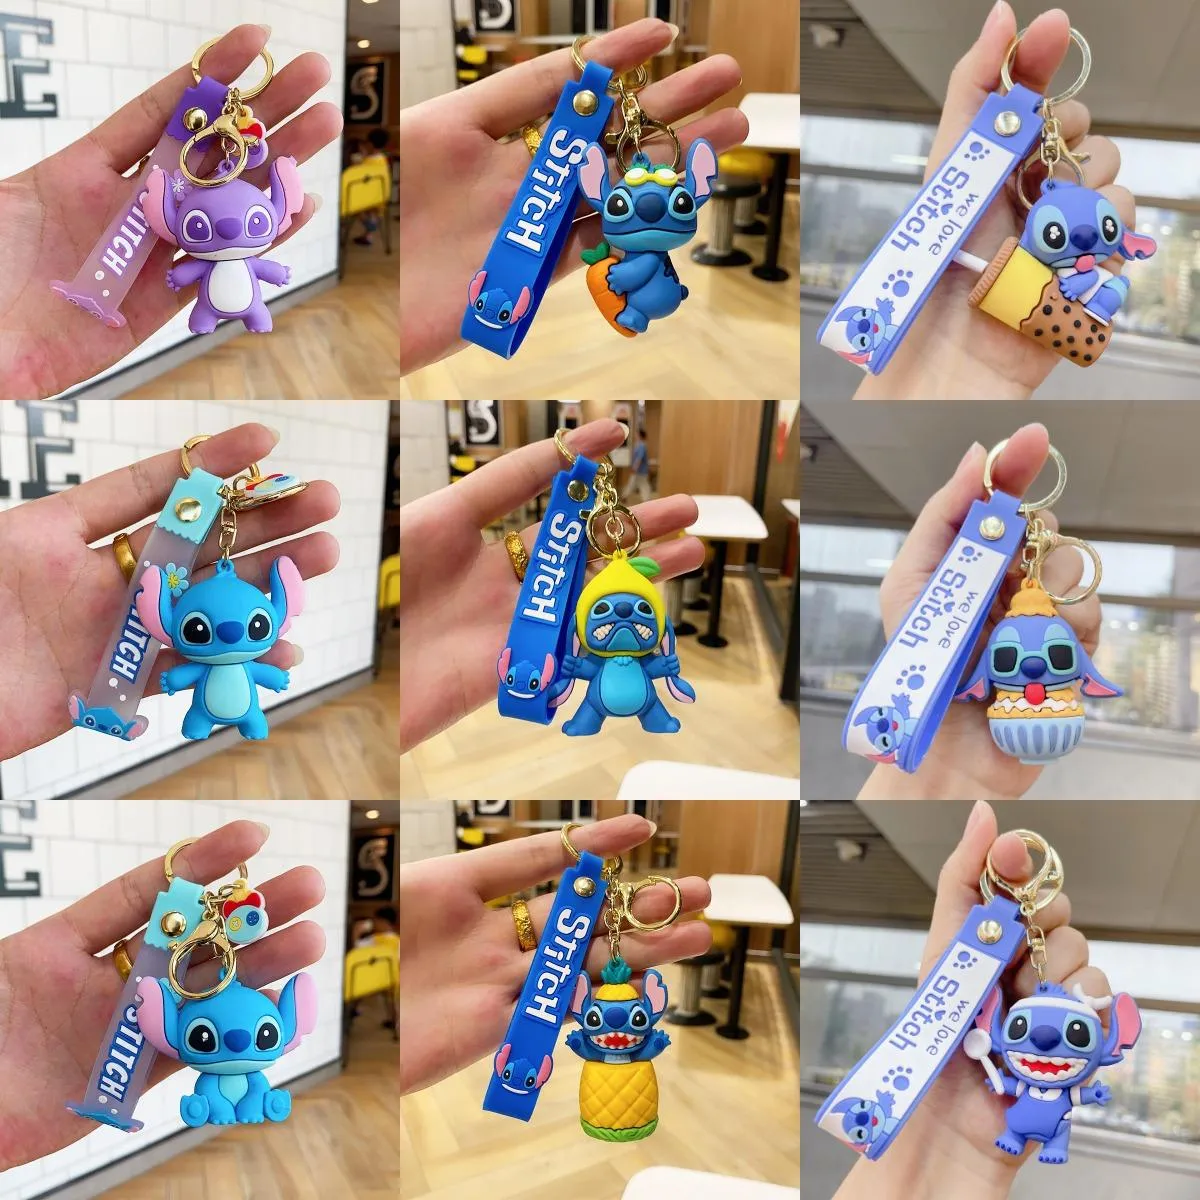 Cartoon and anime classic series keychains, figurines, bags, pendants, cross-border keychains, small gifts wholesale